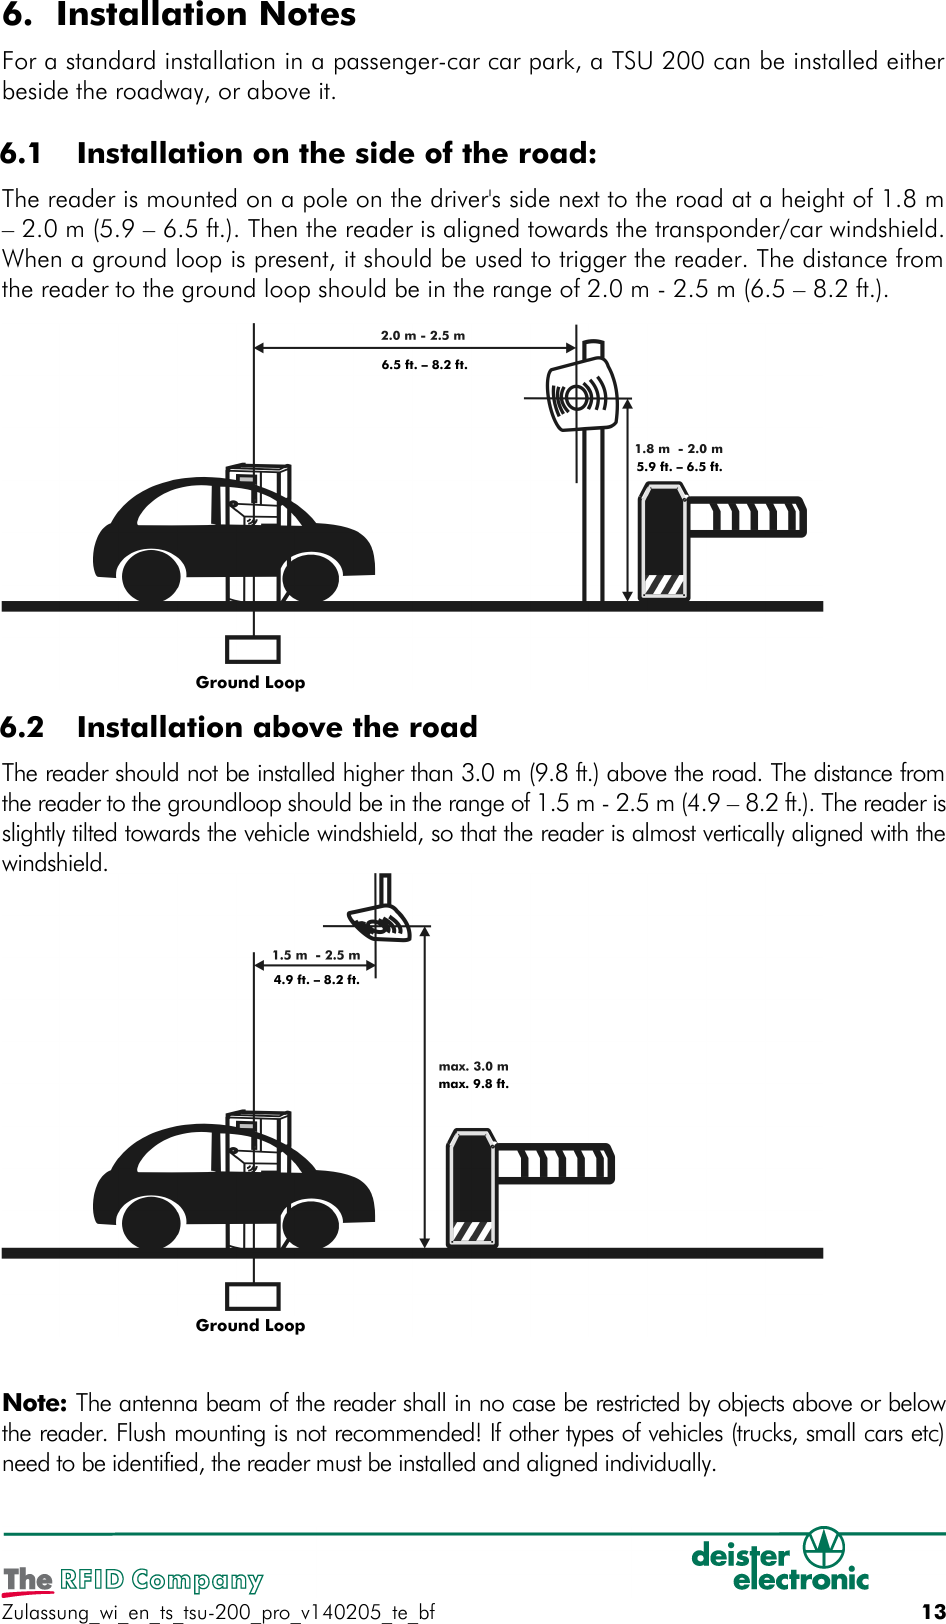 6. Installation NotesFor a standard installation in a passenger-car car park, a TSU 200 can be installed eitherbeside the roadway, or above it. 6.1  Installation on the side of the road:The reader is mounted on a pole on the driver&apos;s side next to the road at a height of 1.8 m– 2.0 m (5.9 – 6.5 ft.). Then the reader is aligned towards the transponder/car windshield.When a ground loop is present, it should be used to trigger the reader. The distance fromthe reader to the ground loop should be in the range of 2.0 m - 2.5 m (6.5 – 8.2 ft.). 6.2  Installation above the roadThe reader should not be installed higher than 3.0 m (9.8 ft.) above the road. The distance fromthe reader to the groundloop should be in the range of 1.5 m - 2.5 m (4.9 – 8.2 ft.). The reader isslightly tilted towards the vehicle windshield, so that the reader is almost vertically aligned with thewindshield.Note: The antenna beam of the reader shall in no case be restricted by objects above or belowthe reader. Flush mounting is not recommended! If other types of vehicles (trucks, small cars etc)need to be identified, the reader must be installed and aligned individually.Zulassung_wi_en_ts_tsu-200_pro_v140205_te_bf 136.5 ft. – 8.2 ft.5.9 ft. – 6.5 ft.Ground Loop4.9 ft. – 8.2 ft.max. 9.8 ft.Ground Loop